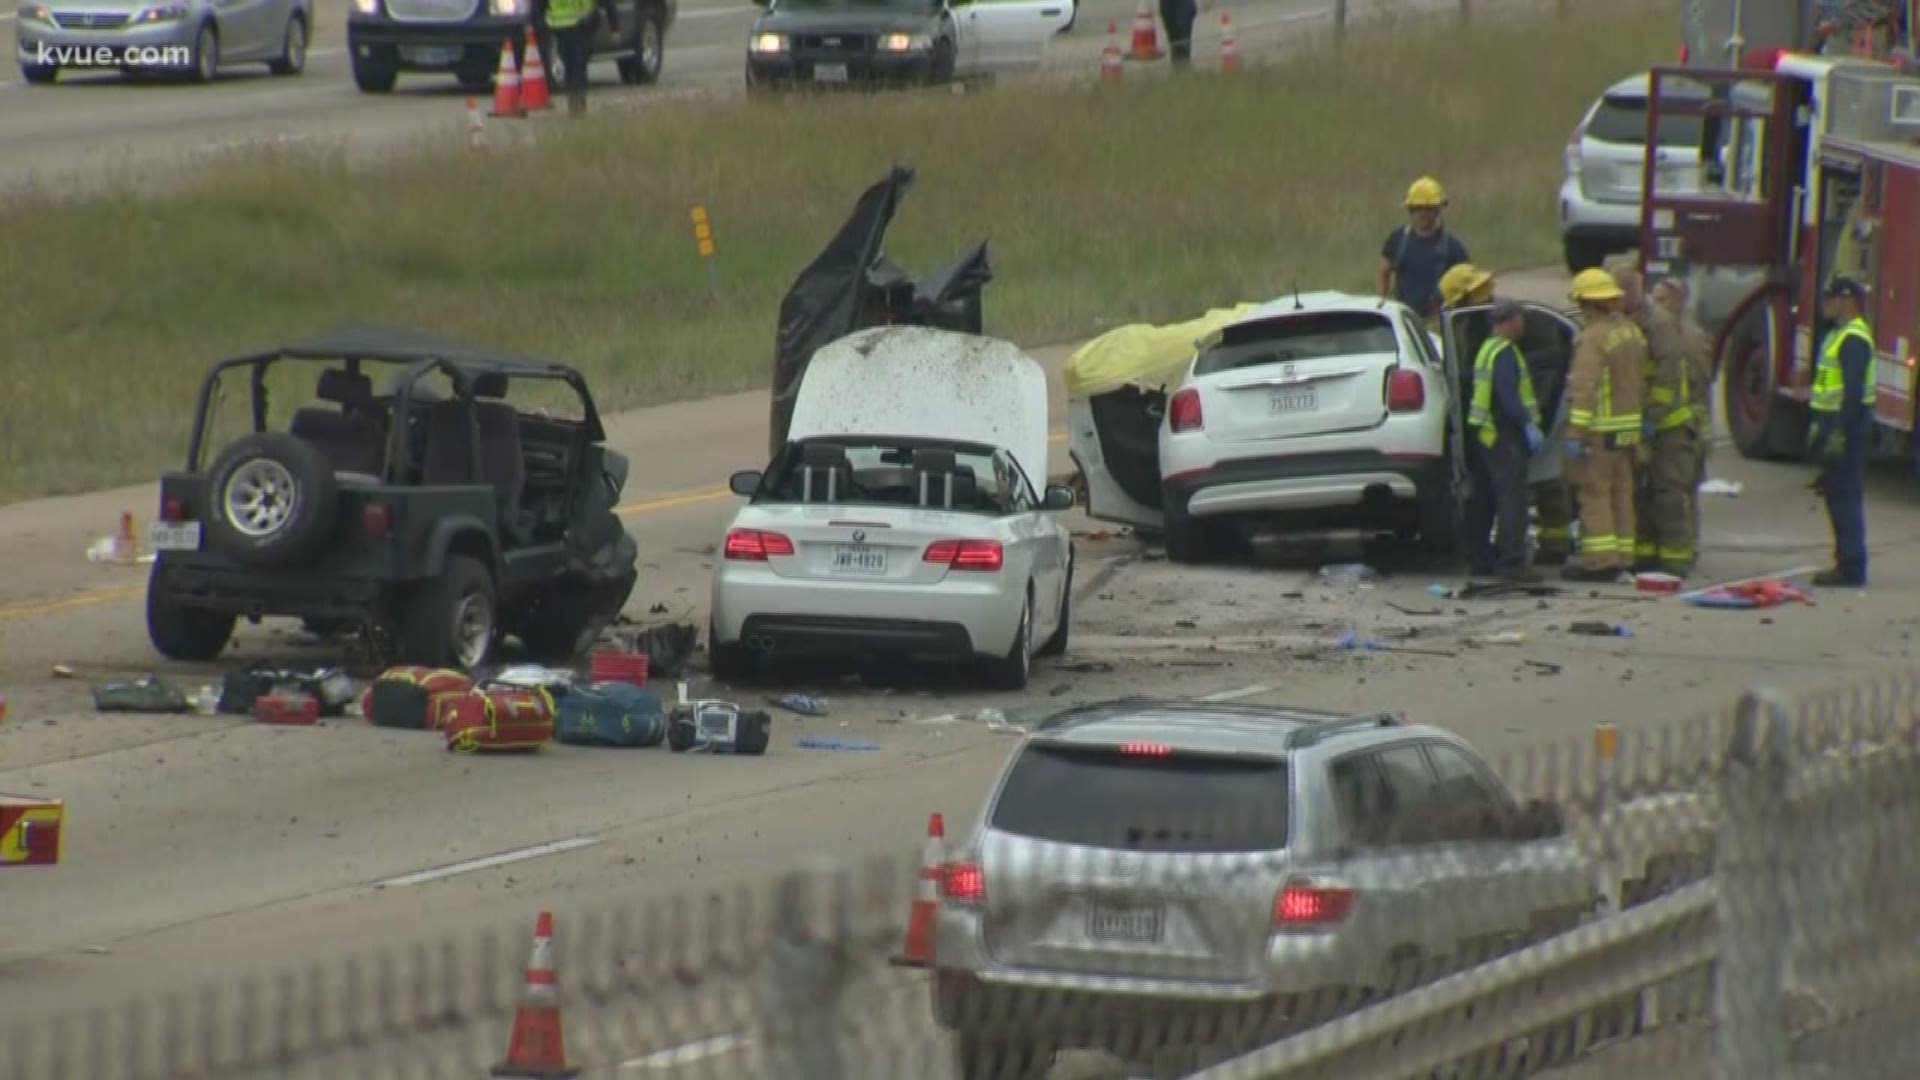 There were two deadly crashes in Austin today. The first happening around 2:30 p.m. in Northwest Austin.